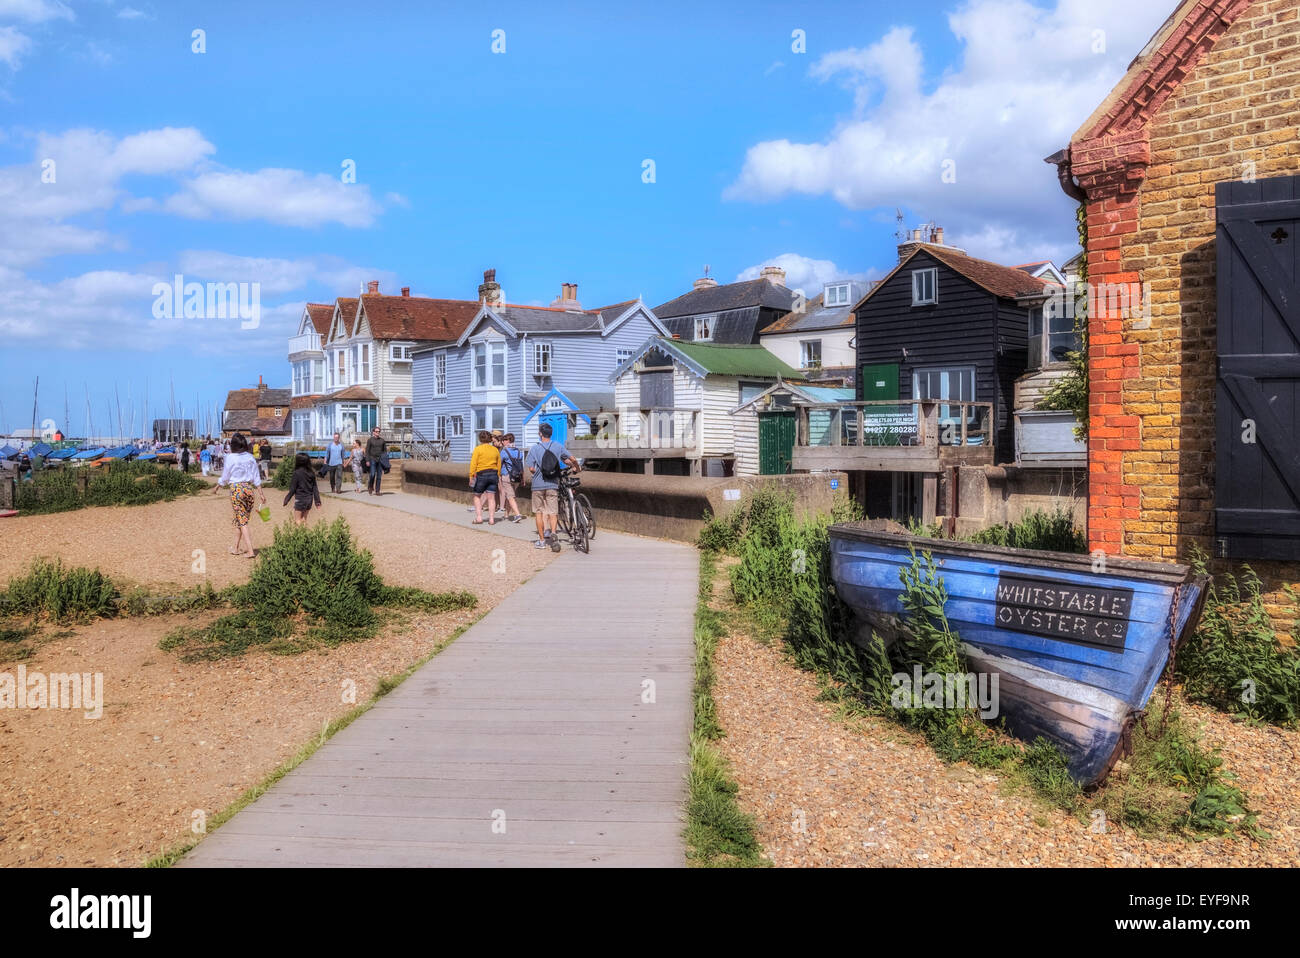 Whitstable, Kent, Angleterre, Royaume-Uni Banque D'Images